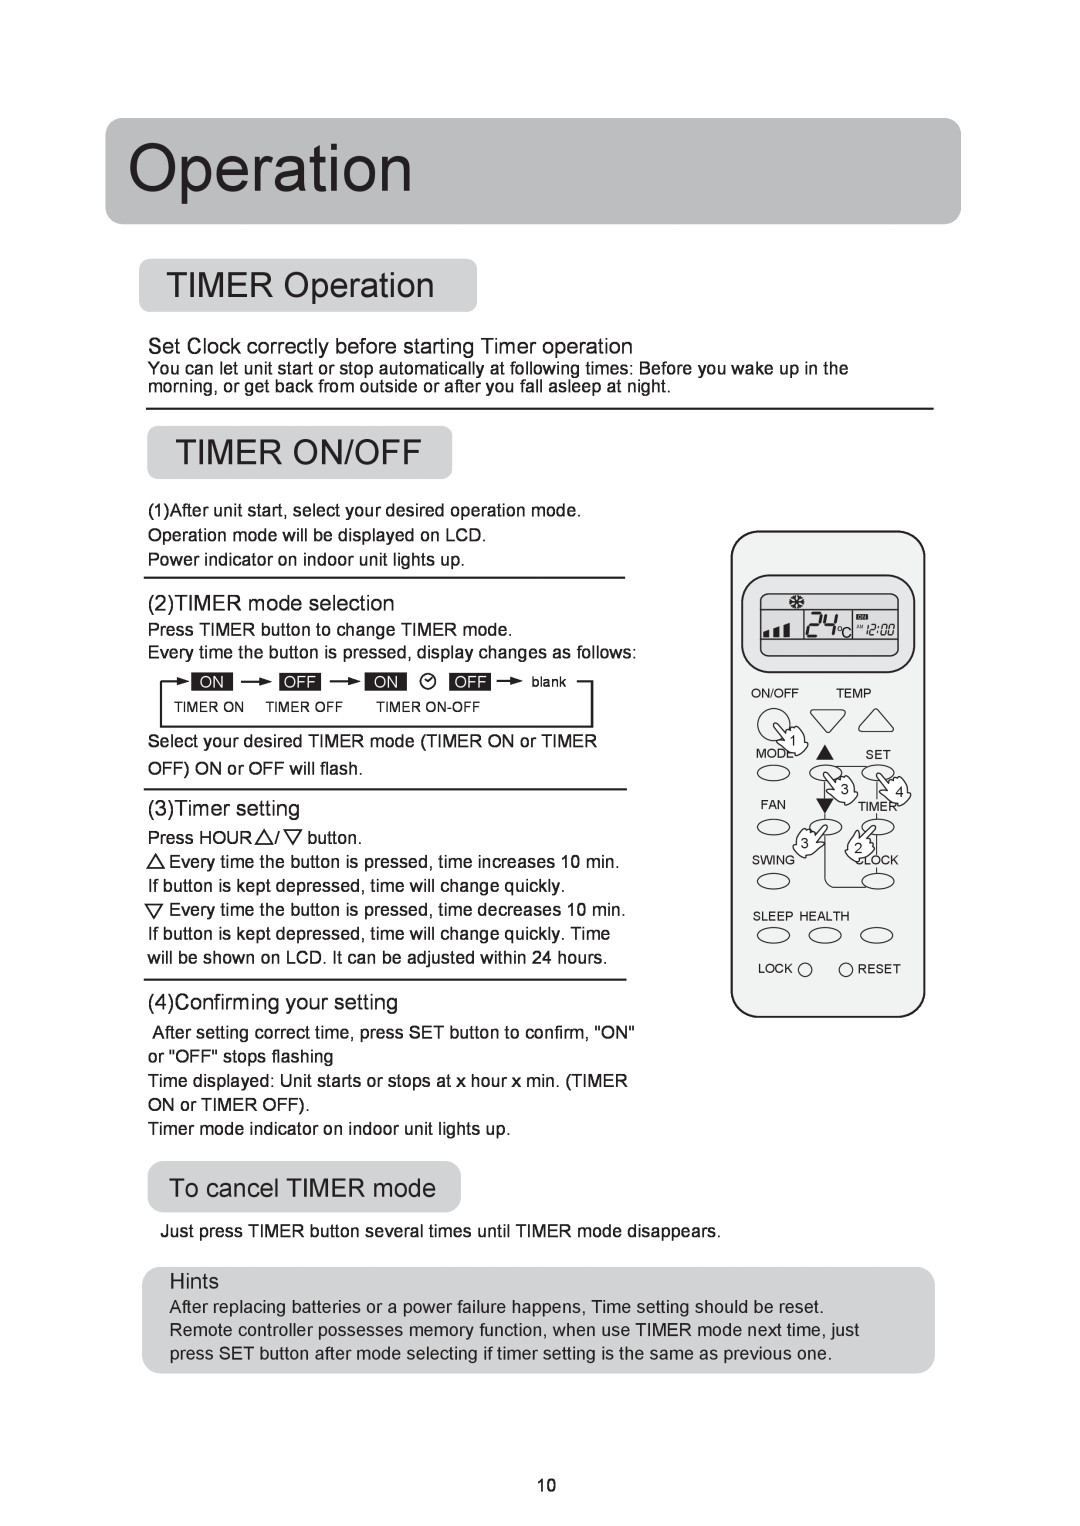 Haier HSU-09RF03/R2 TIMER Operation, Timer On/Off, To cancel TIMER mode, 2TIMER mode selection, 3Timer setting, Hints 